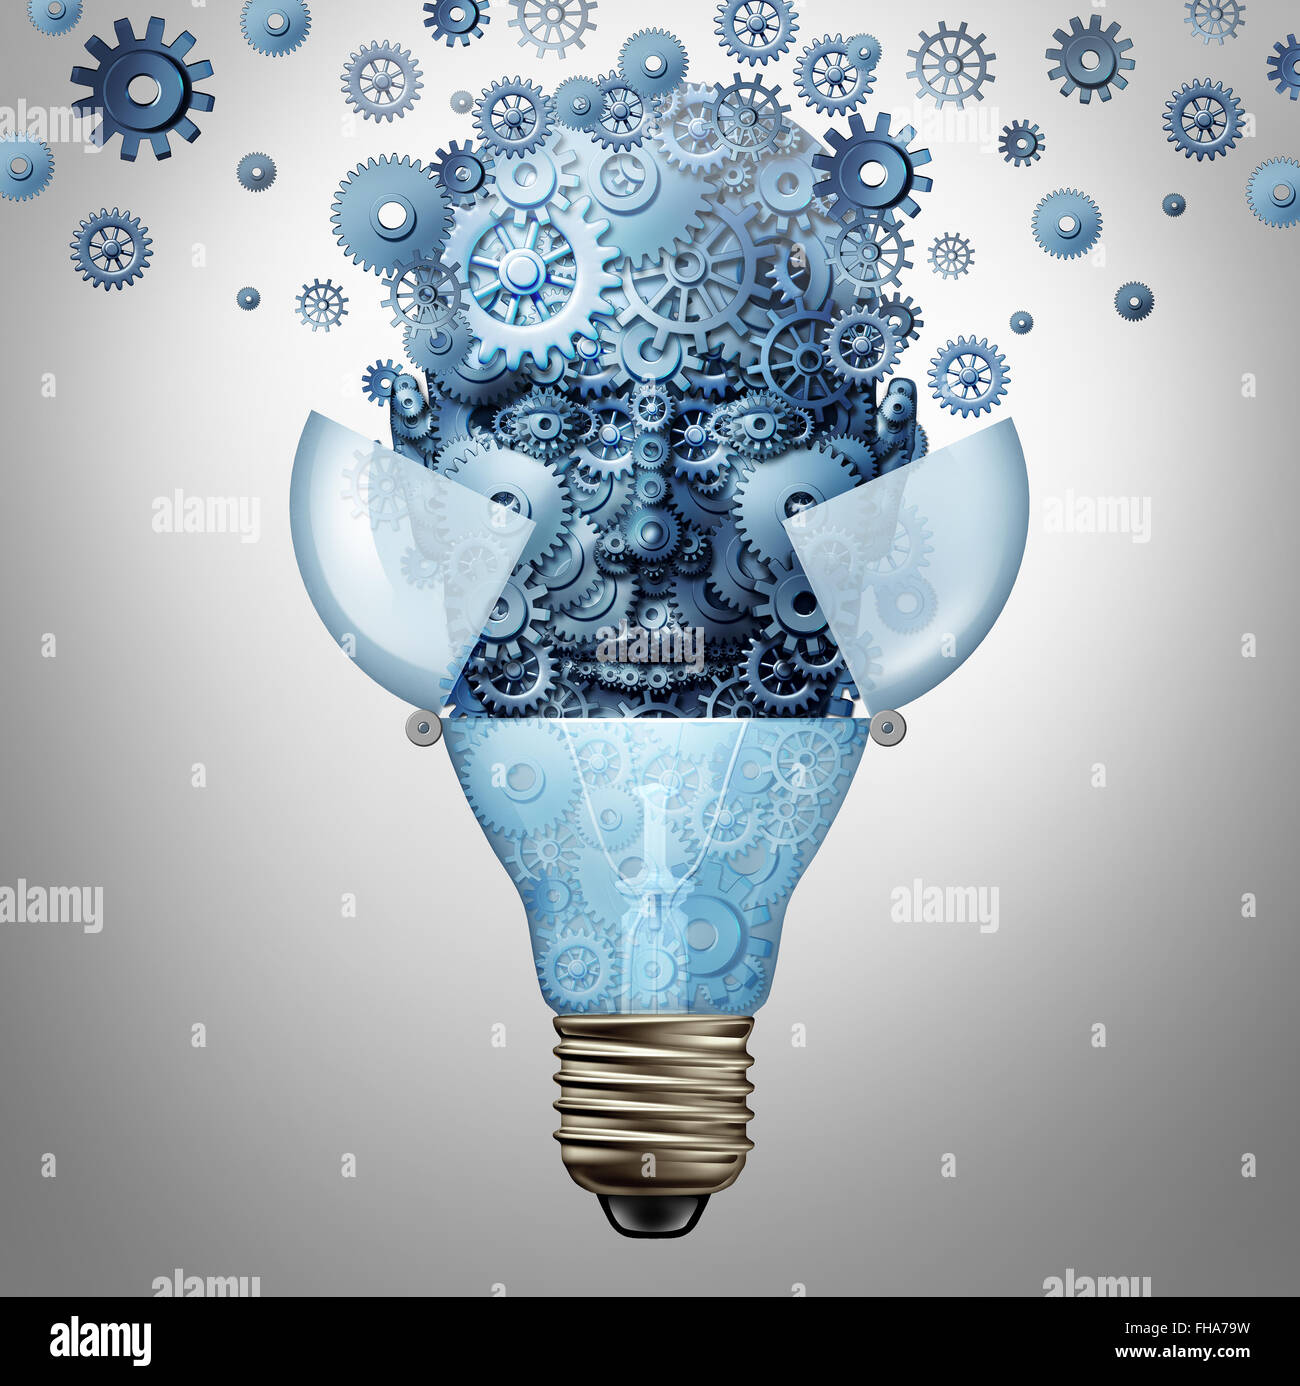 Artificial intelligence ideas as a robot head symbol made of gears and cog wheels emerges out of an open light bulb or lightbulb as an icon of highly advanced creative computing technology. Stock Photo